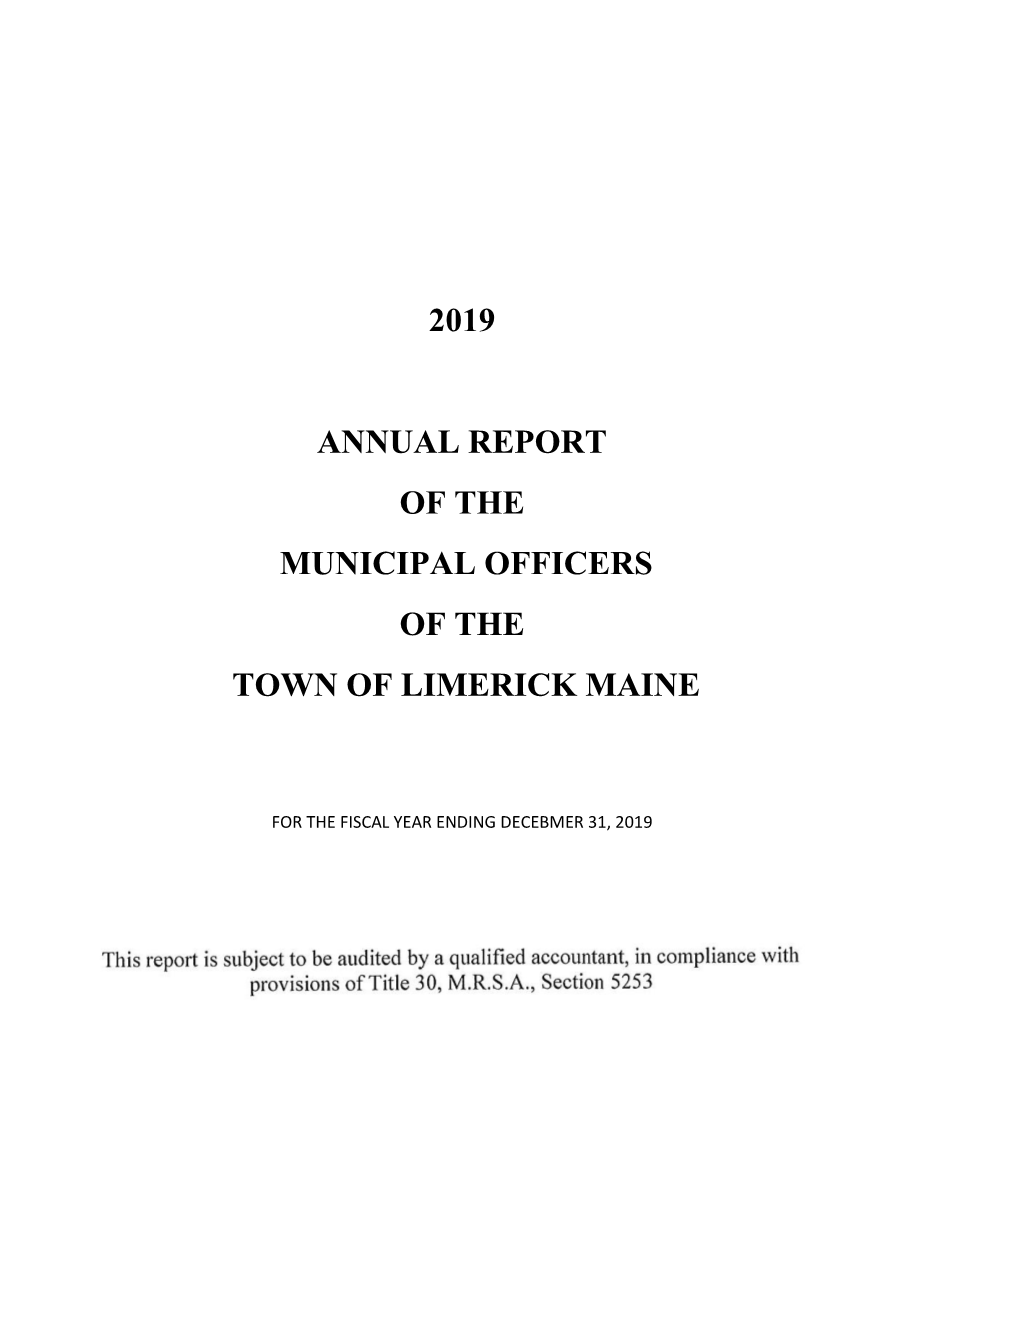 2019 Annual Report of the Municipal Officers of The